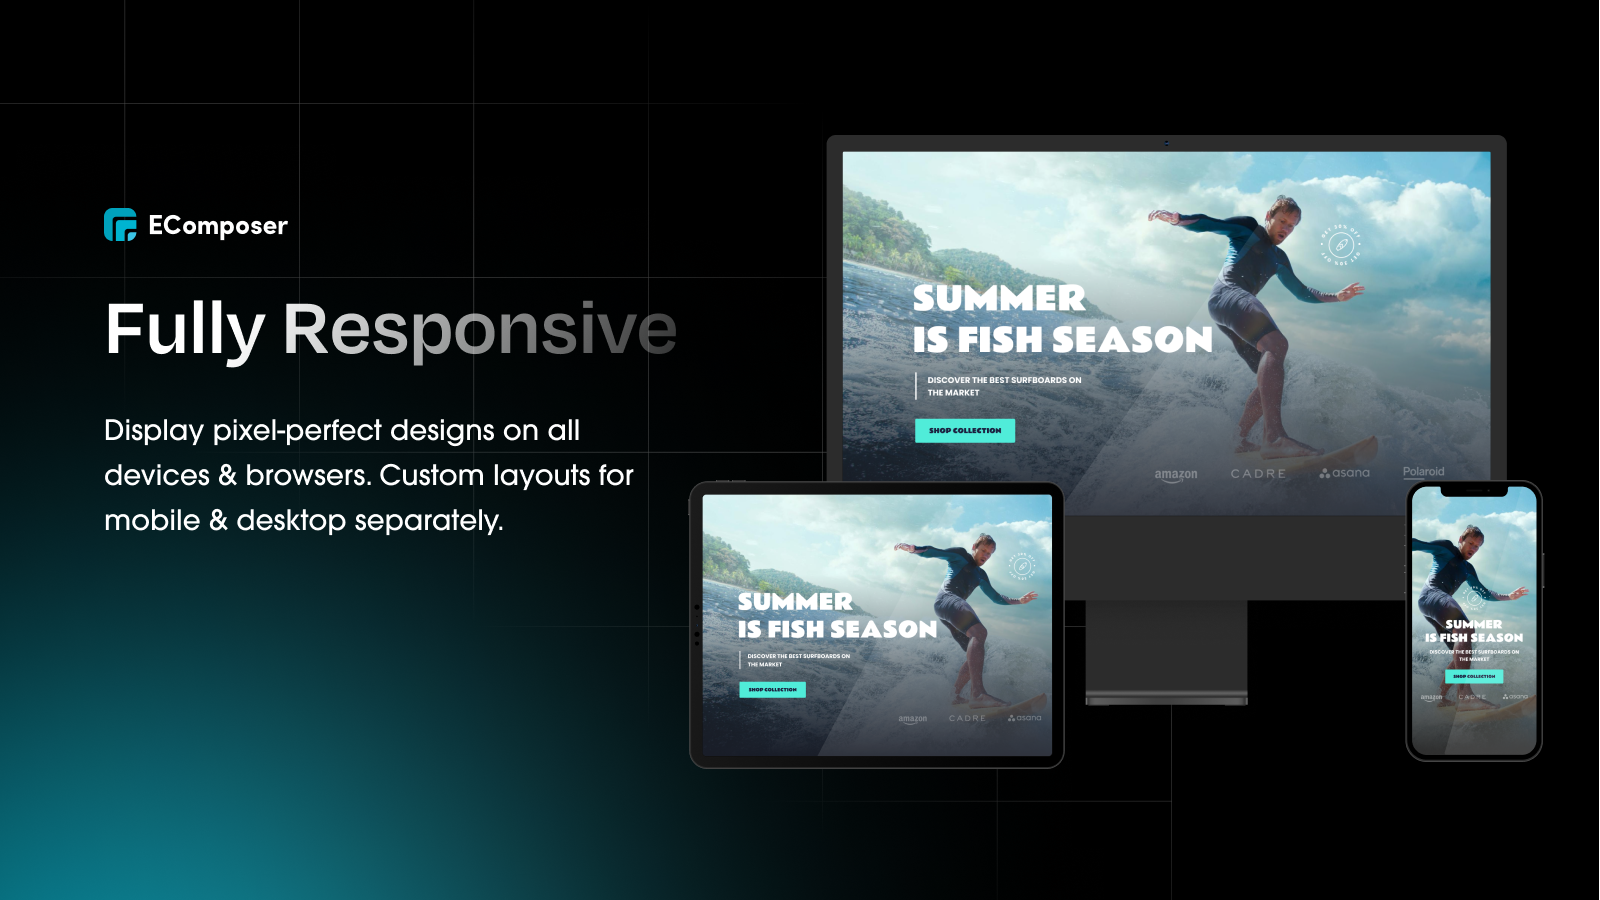 Fully responsive on all devices & browsers